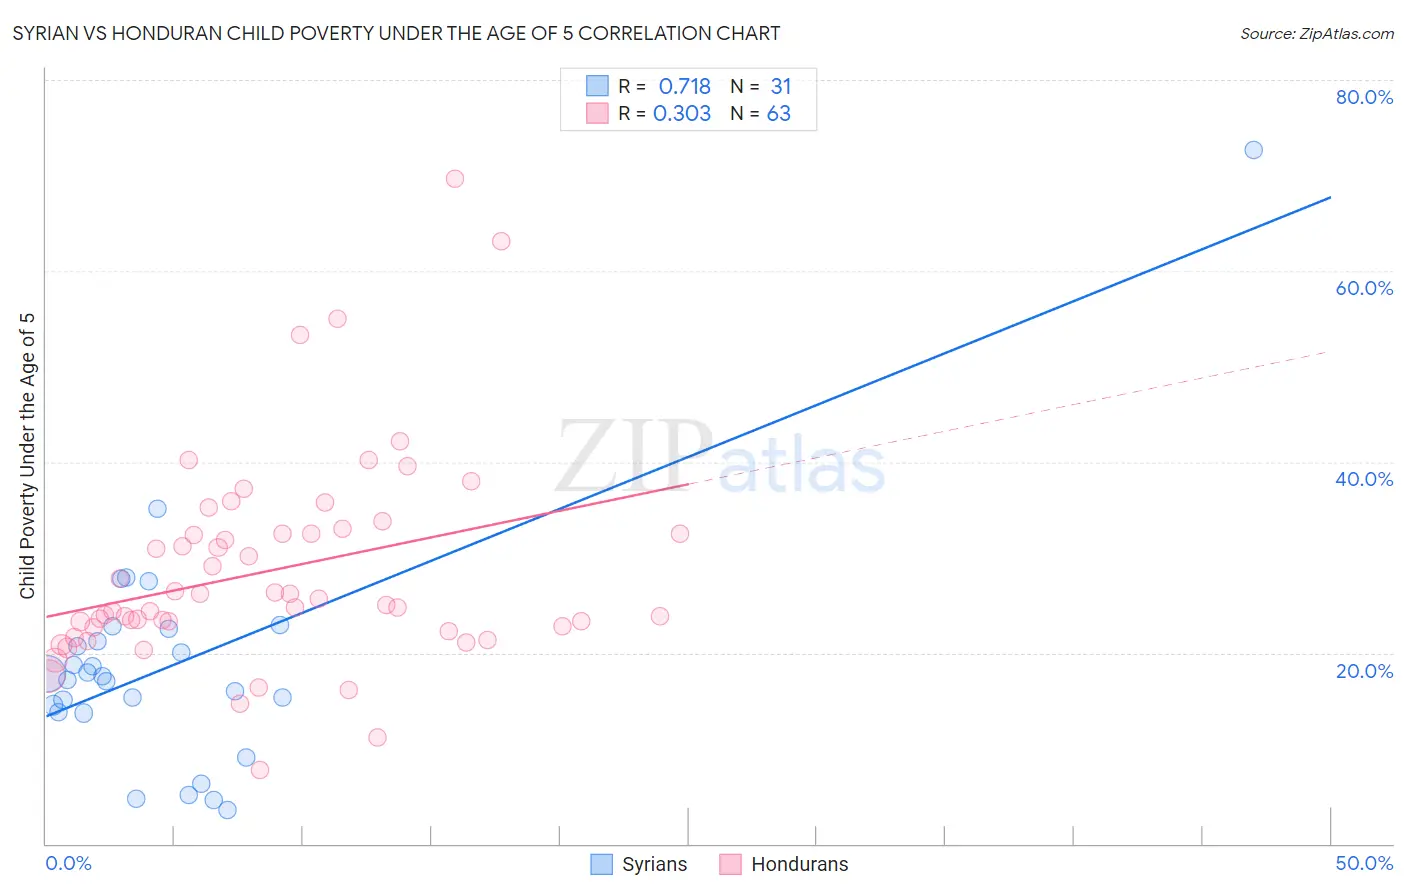 Syrian vs Honduran Child Poverty Under the Age of 5